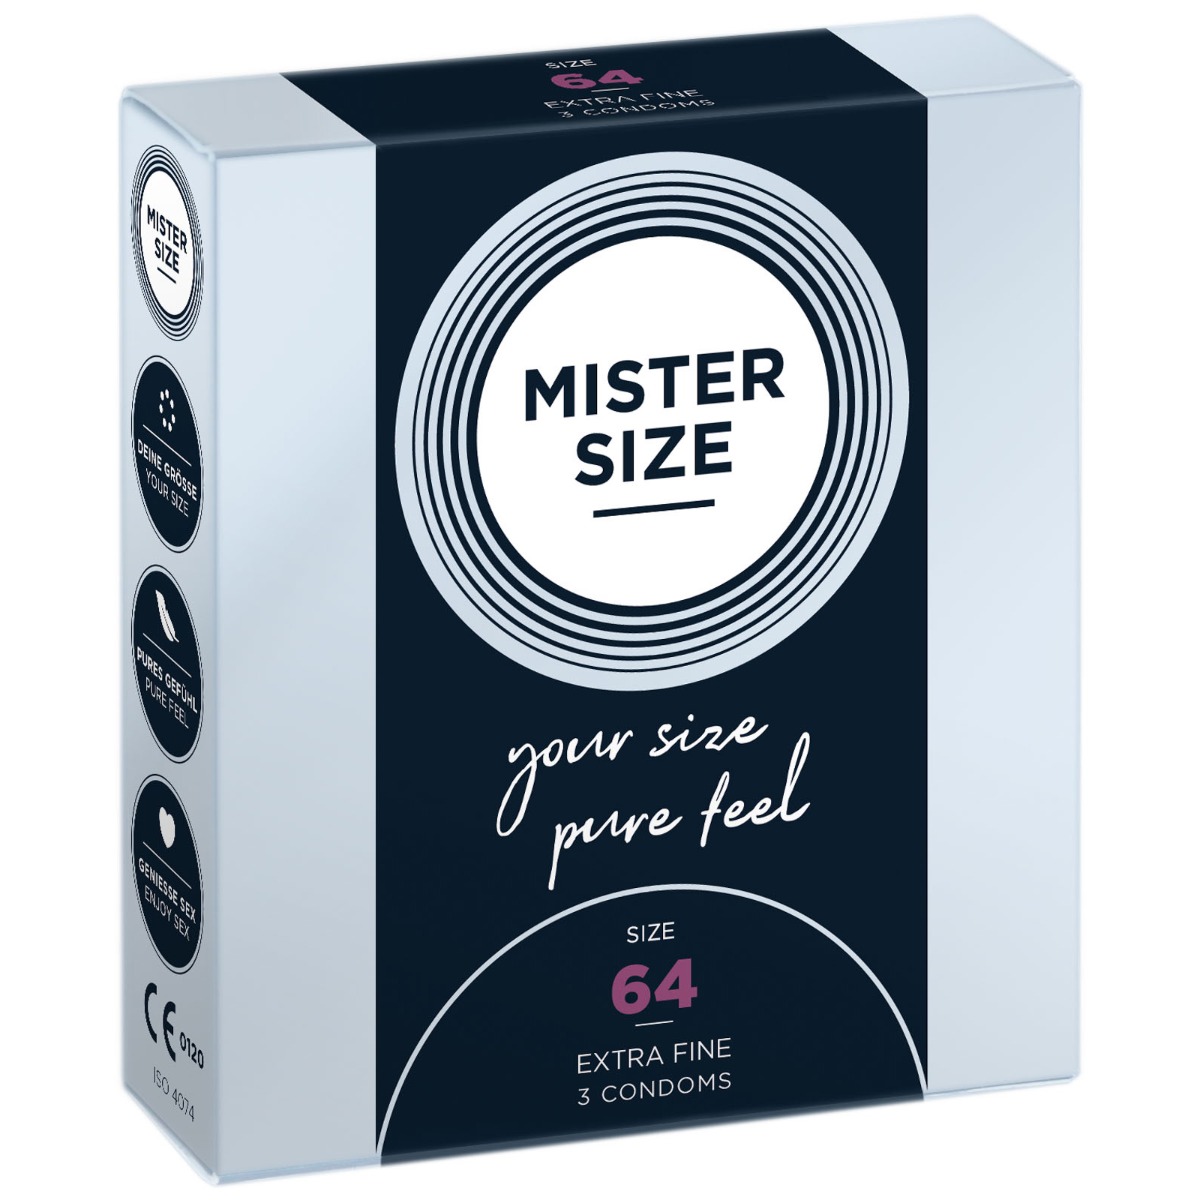 MISTER SIZE - pure feel Condoms - Size 64 mm (3 pack)